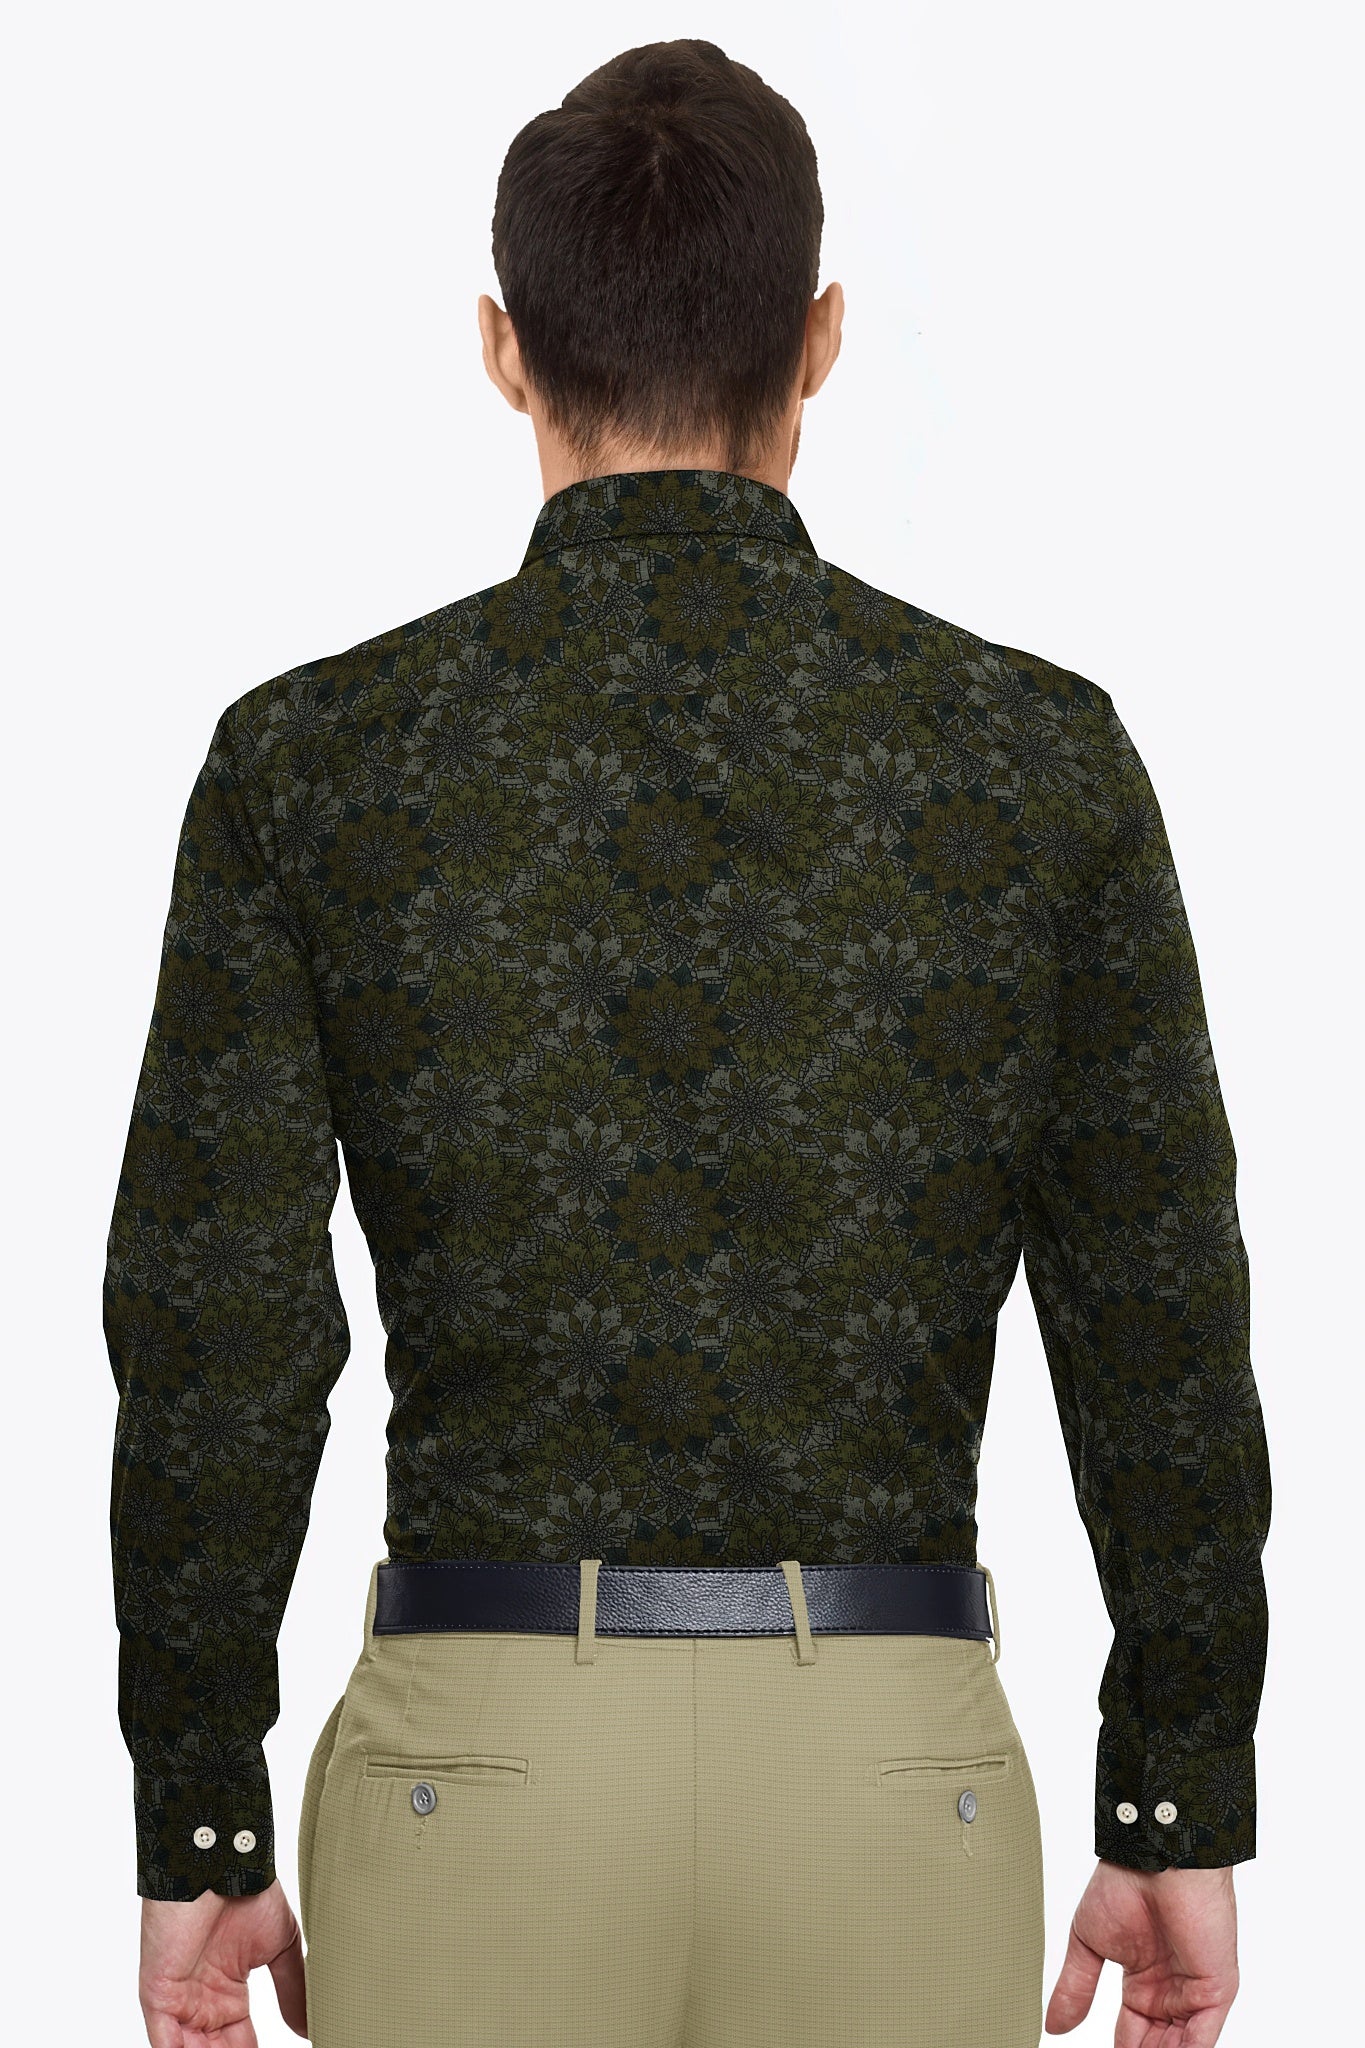 Manatee Gray with Sacramento Green and Olive Green Multicolored Lotus Flower Printed Cotton Shirt